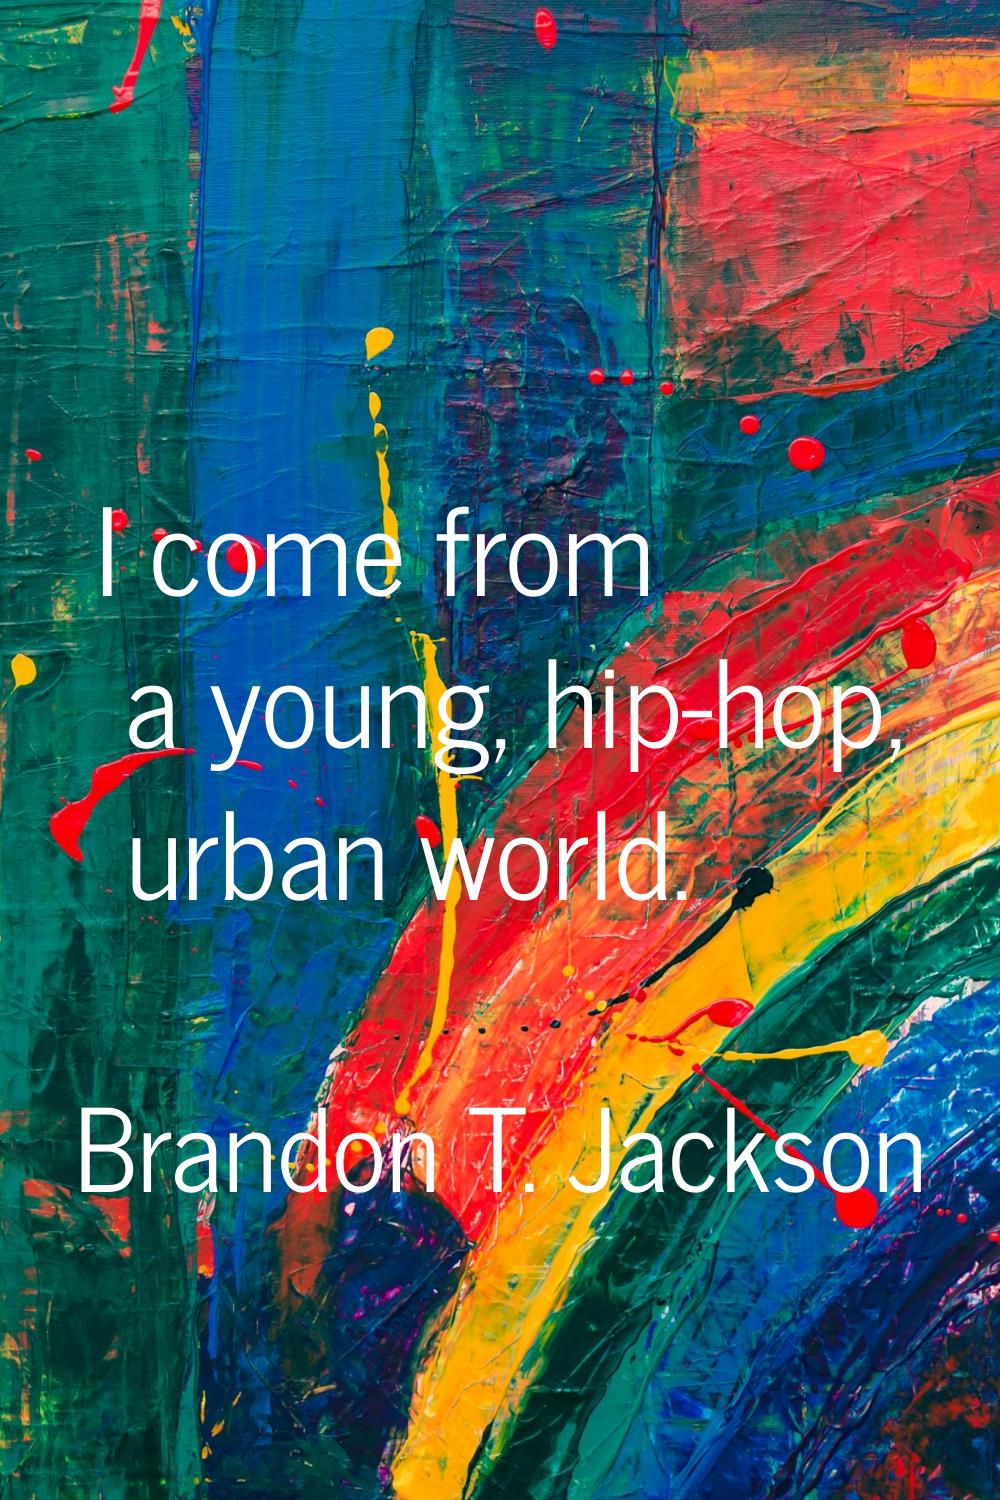 I come from a young, hip-hop, urban world.